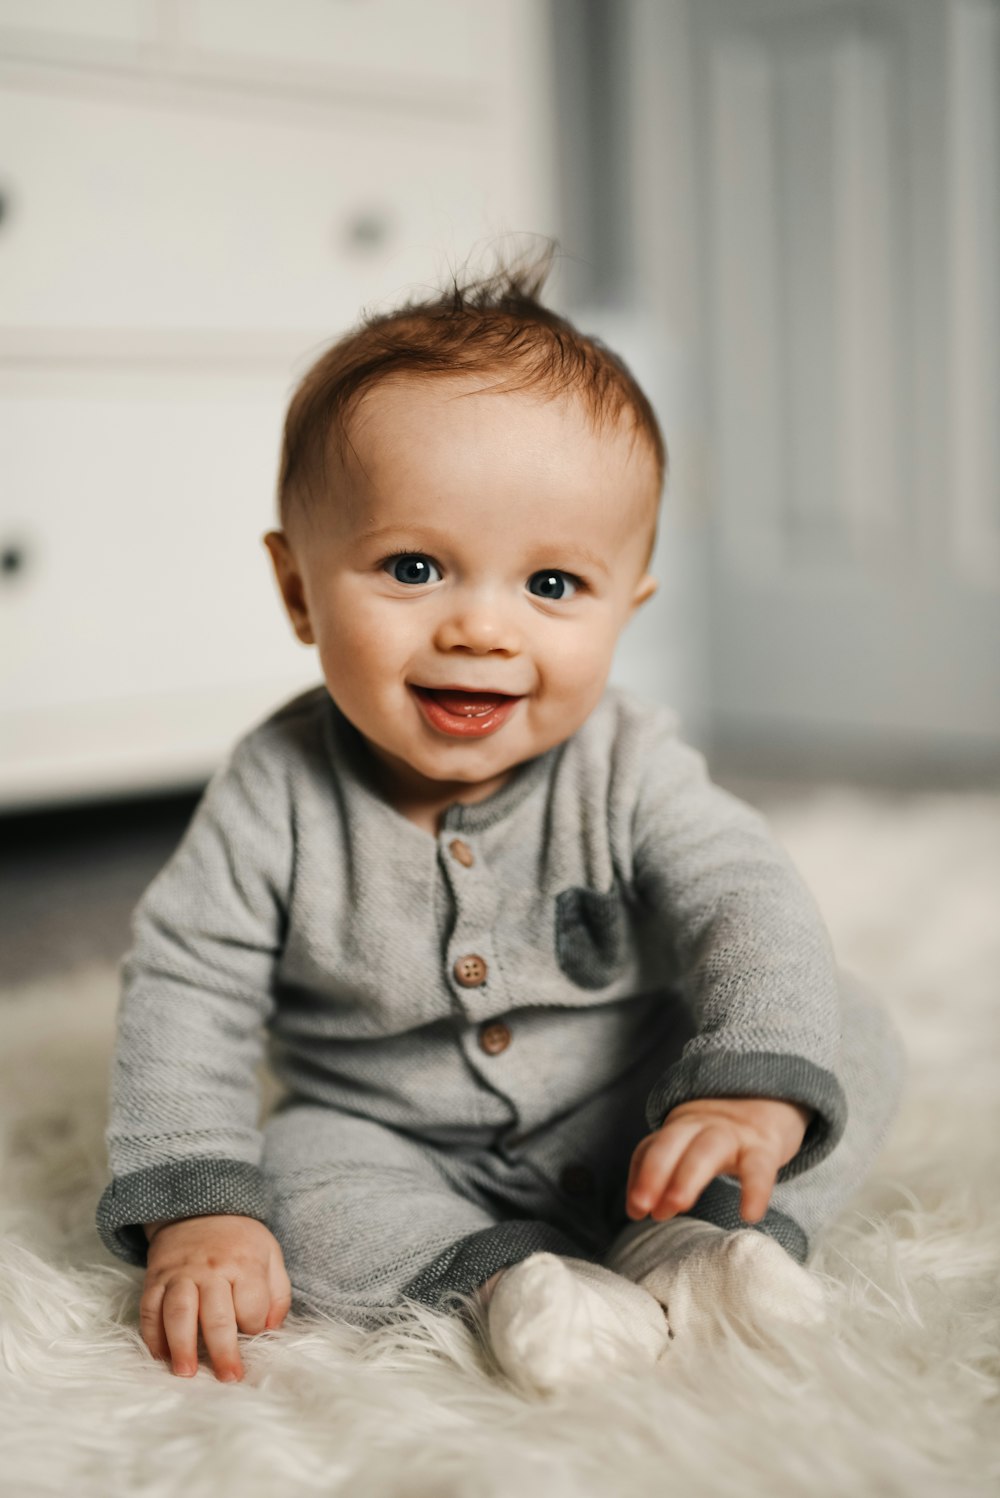 20+ Free Baby Pictures on Unsplash